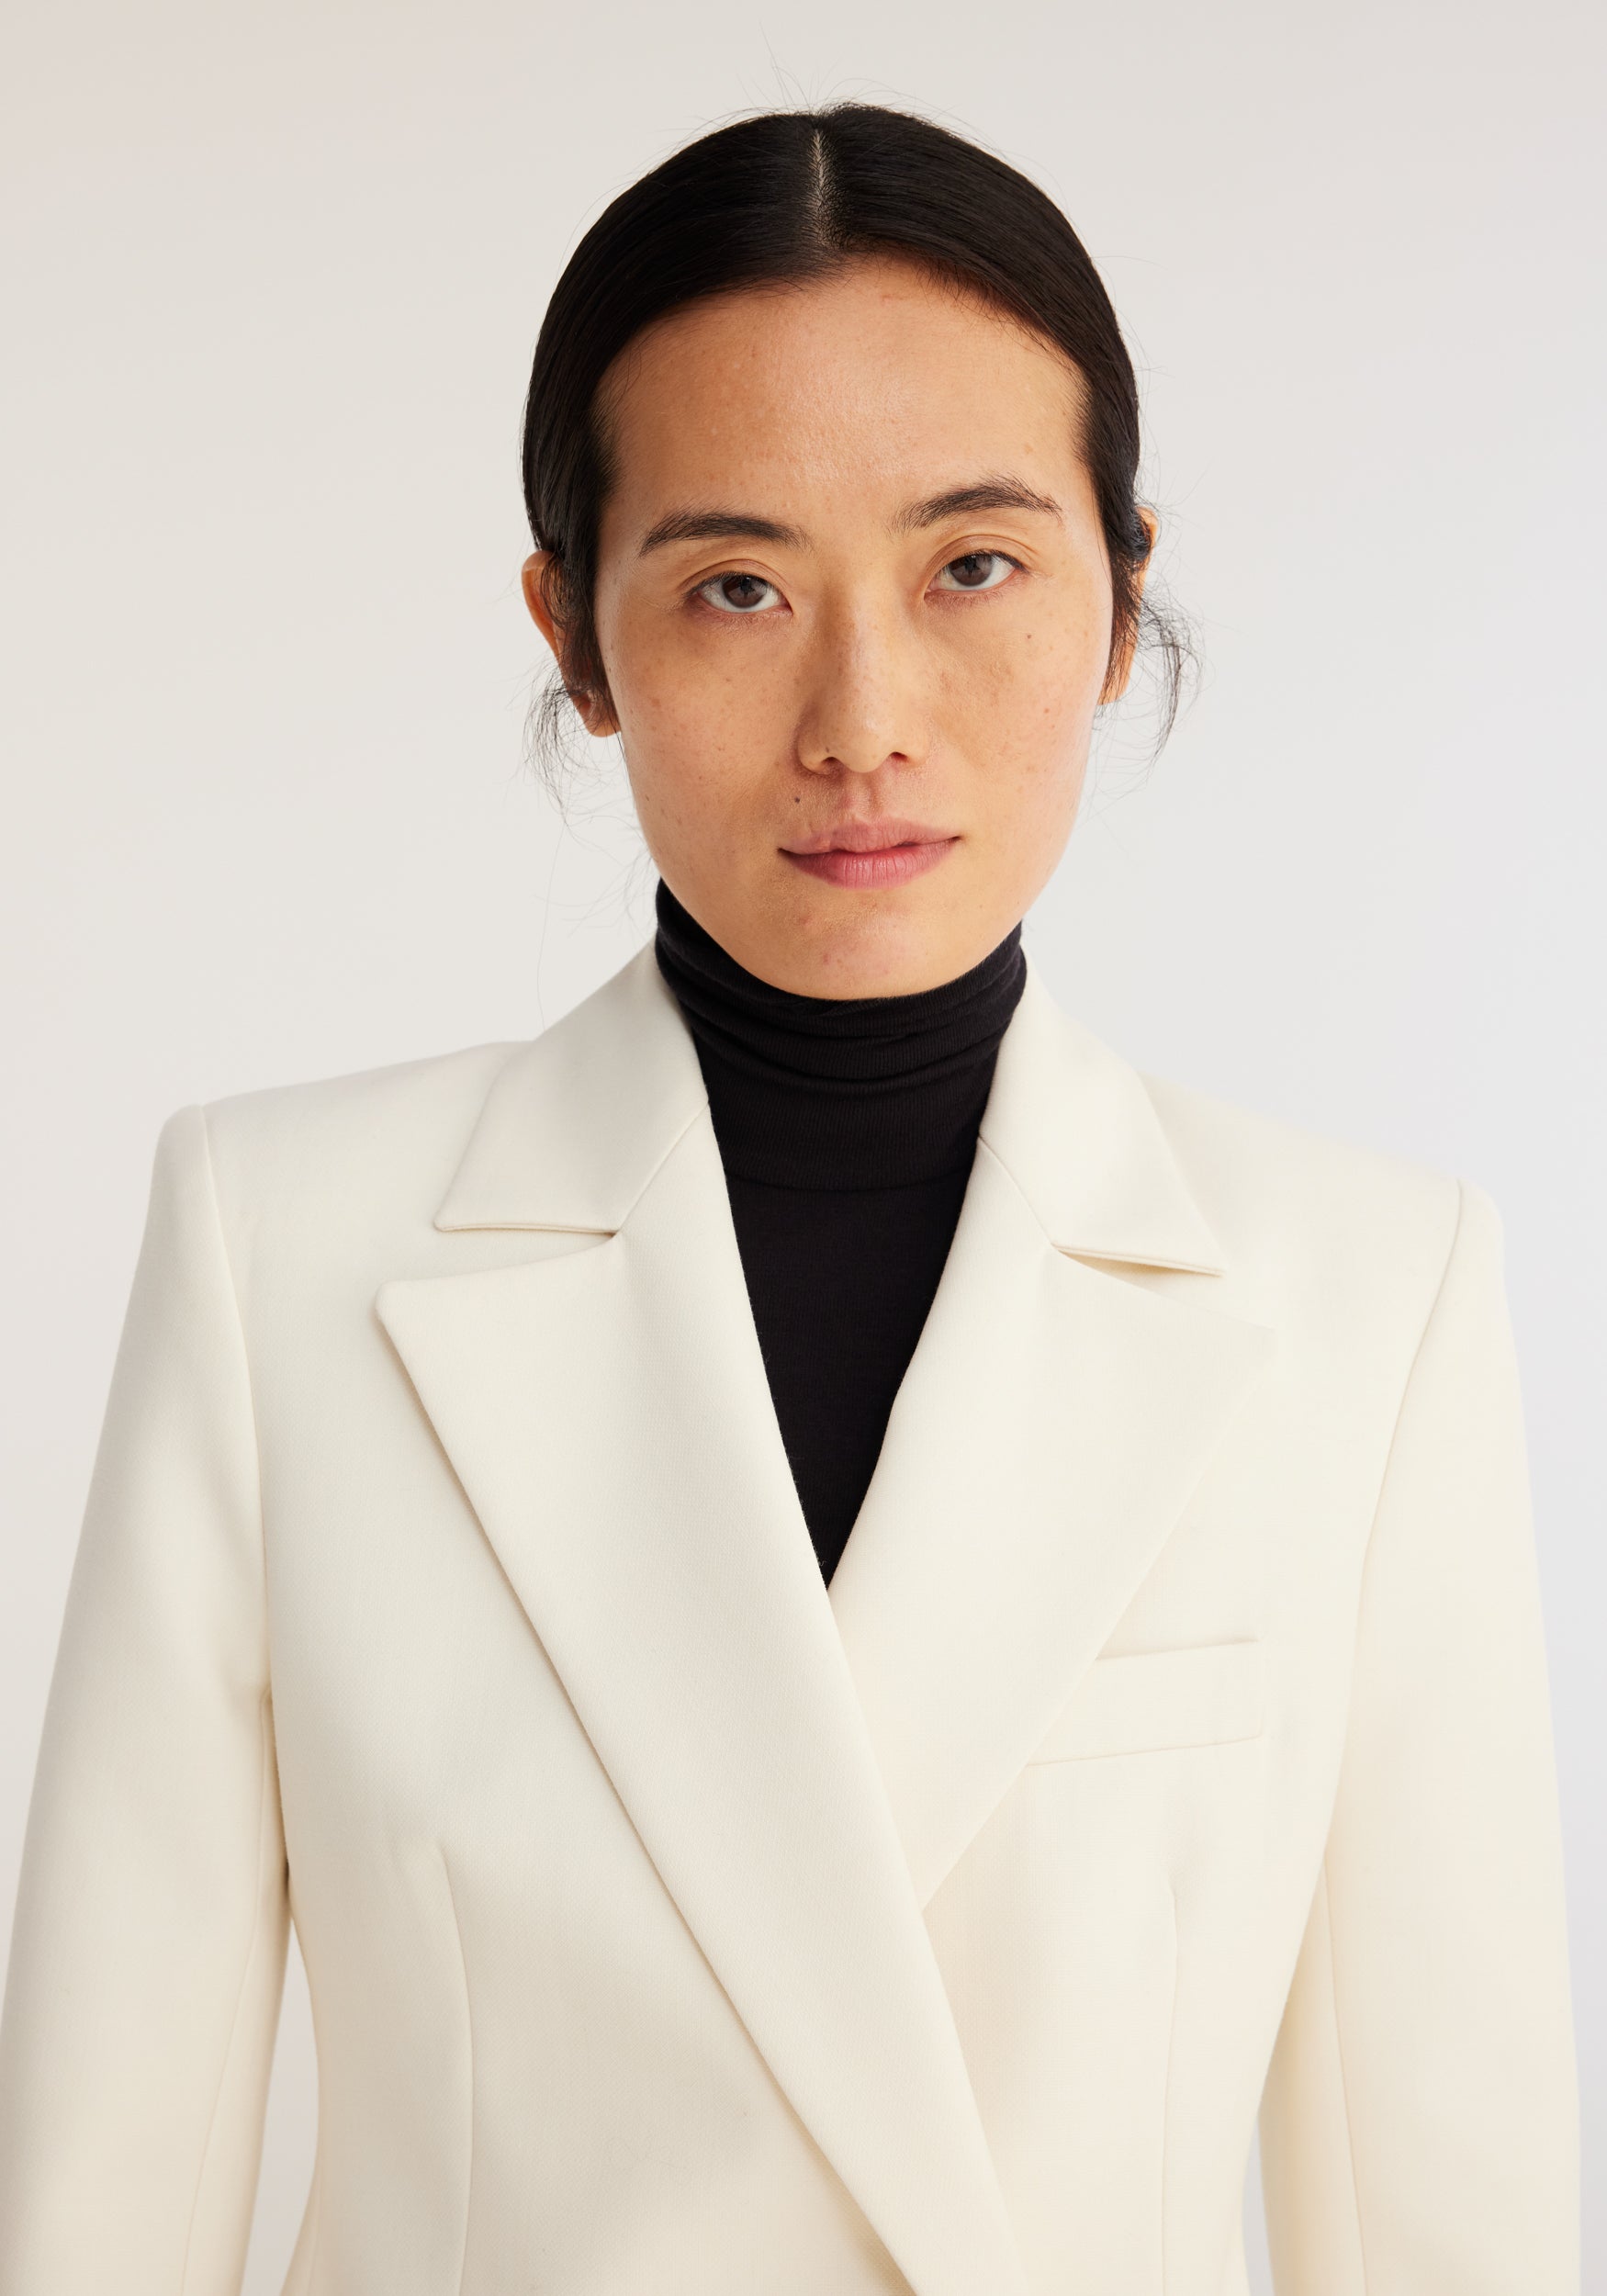 The Rohe Tailored Wool Blazer in Ivory available at The New Trend Australia